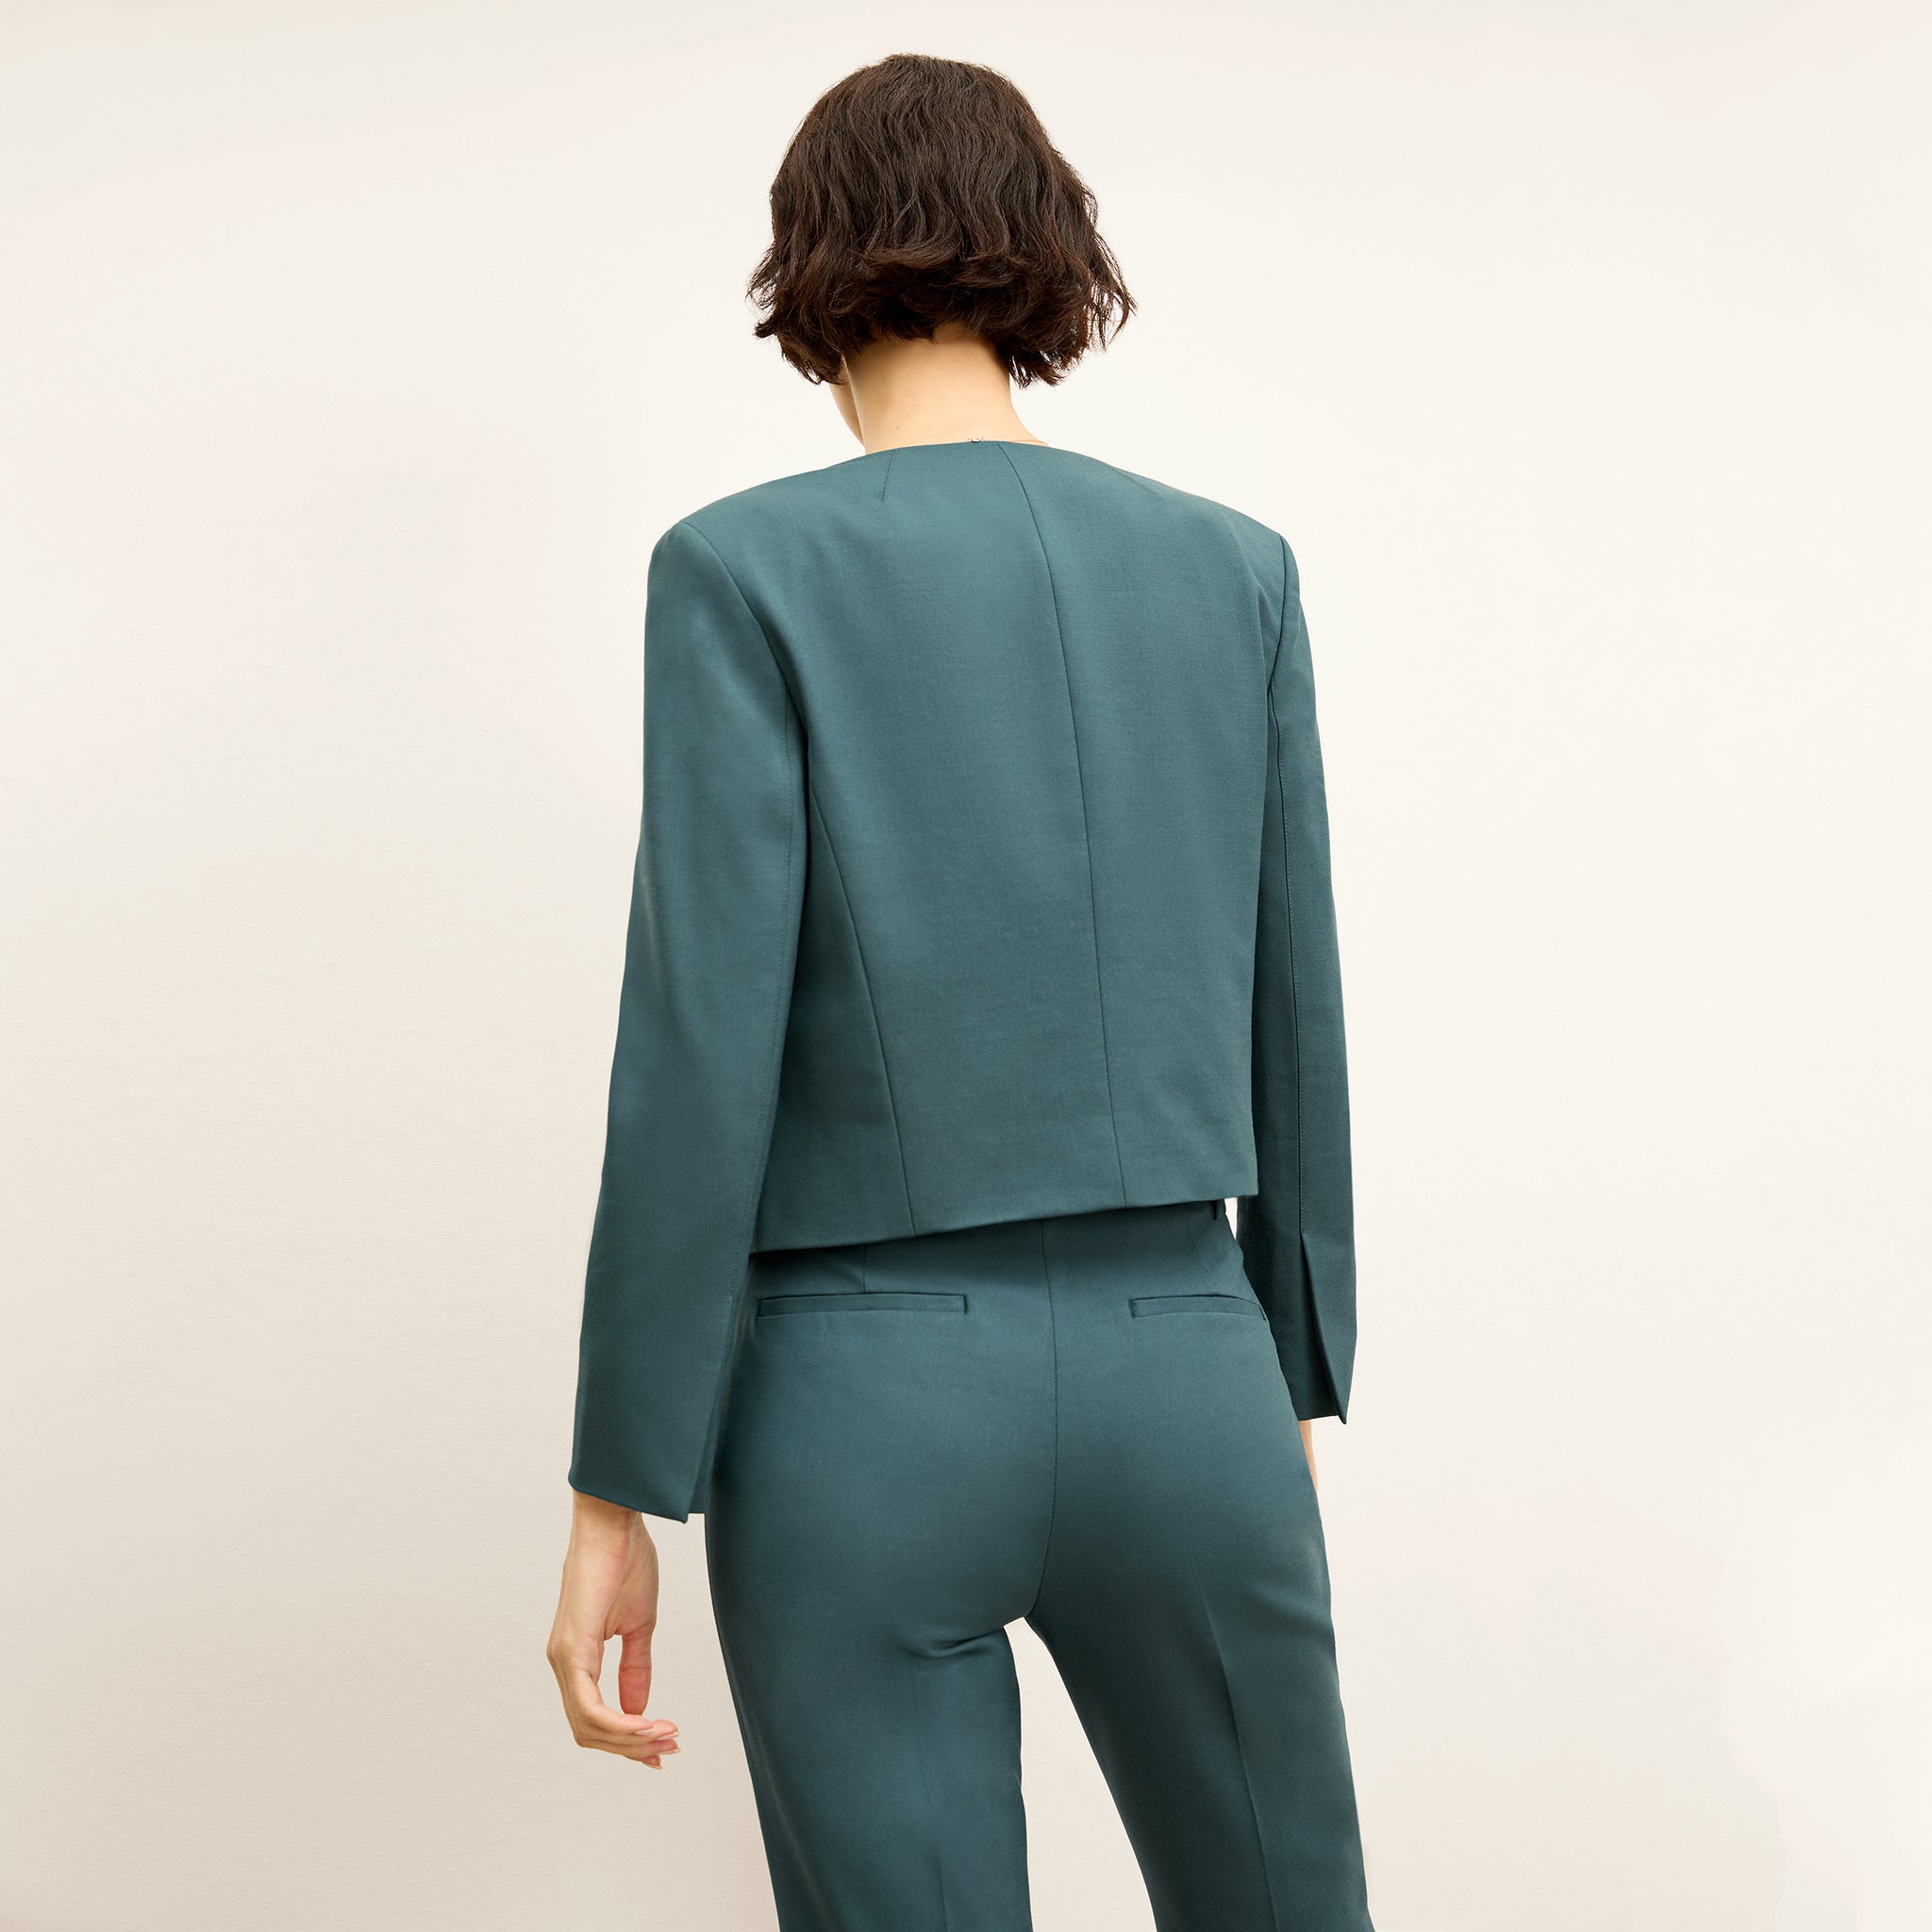 back image of a woman wearing the neale jacket in blue jade